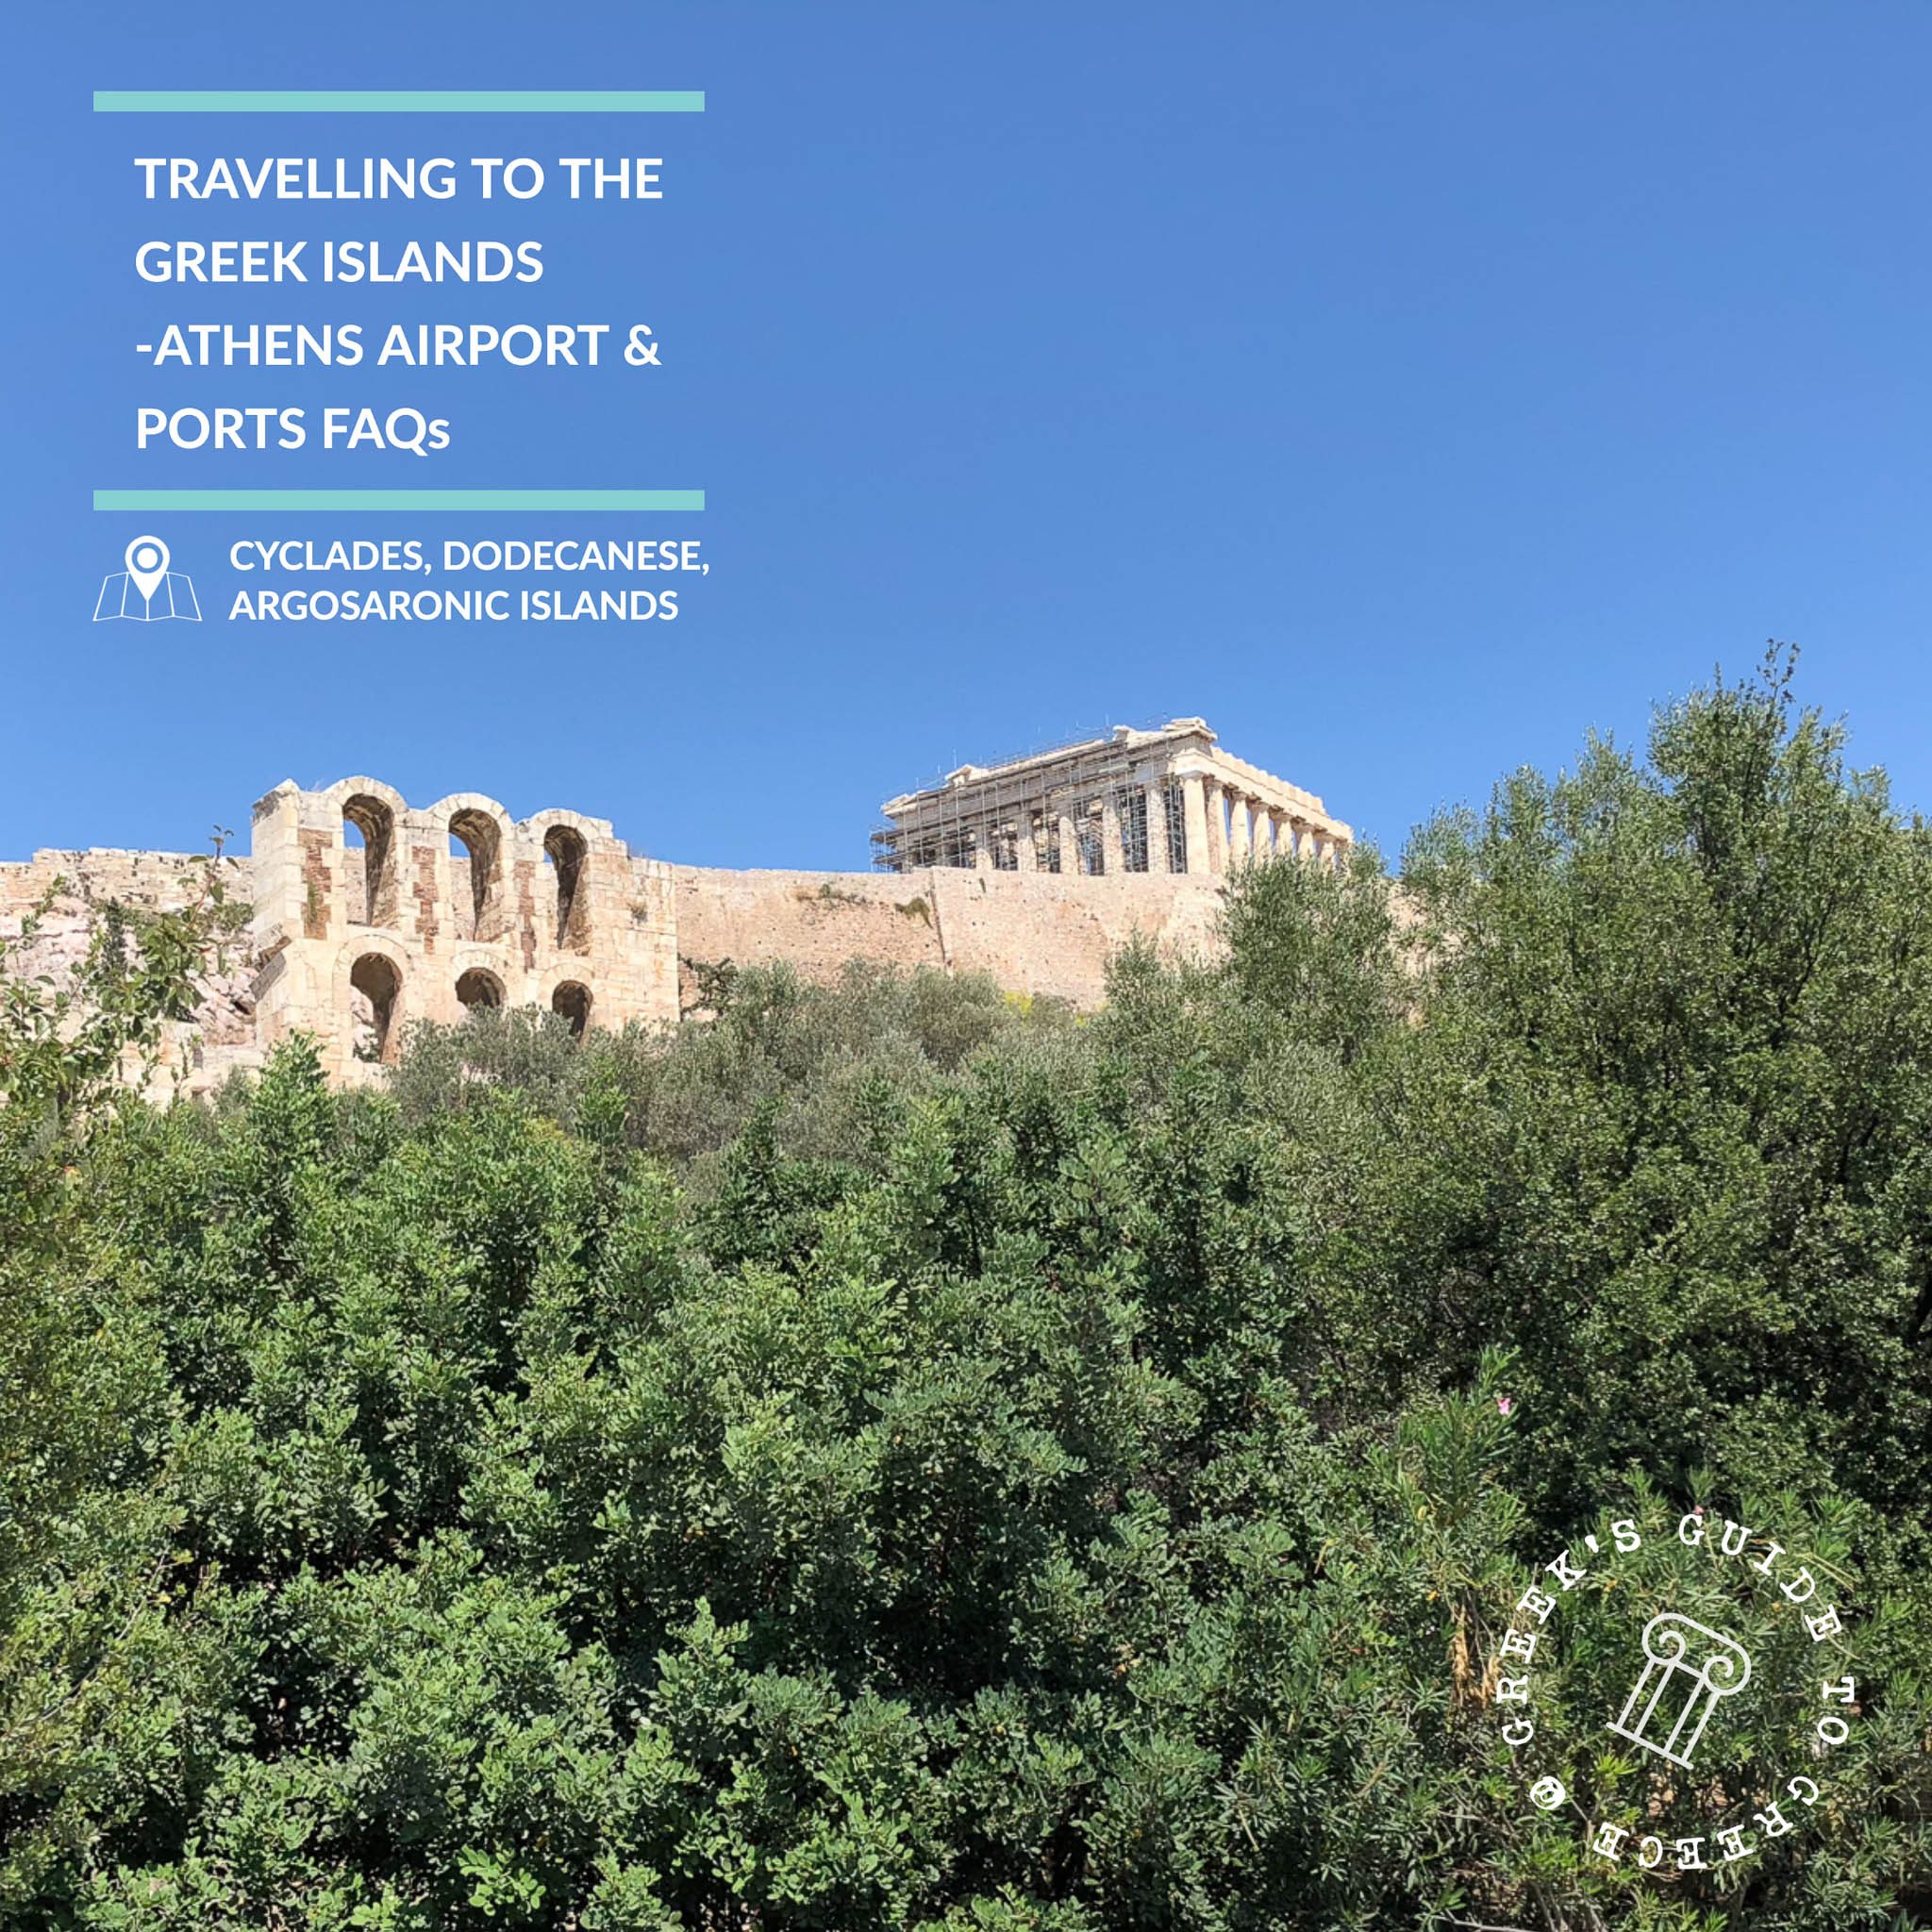 Athens airport ports